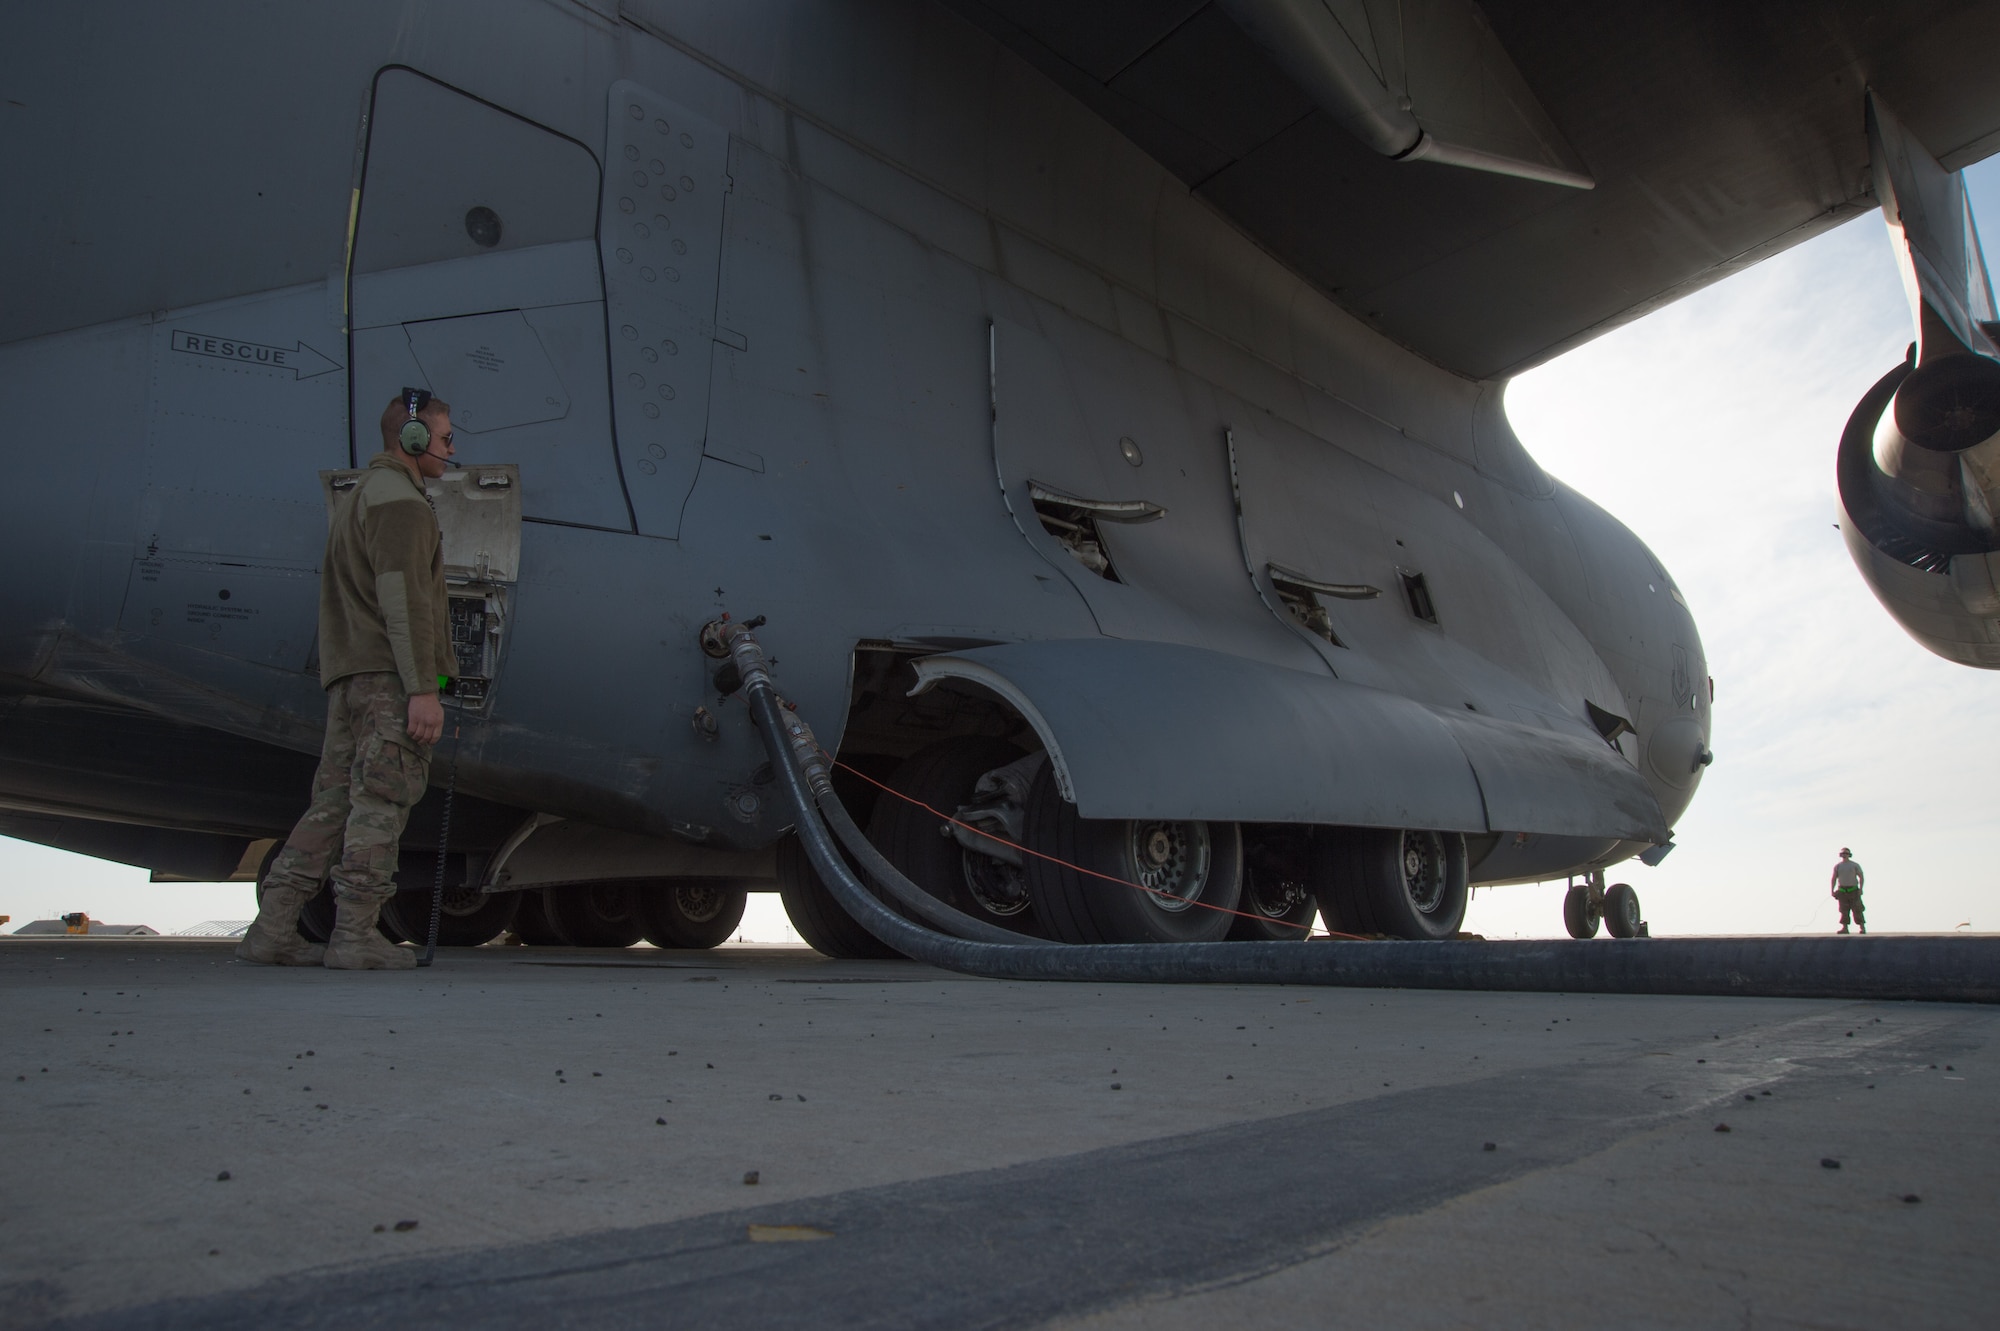 The 5th EAMS is responsible for the aerial port of debarkation and maintains staged C-17 aircraft, as well as providing en route maintenance and support for transient C-17 and C-5 aircraft flying in and out of Iraq, Afghanistan and Southwest Asia.